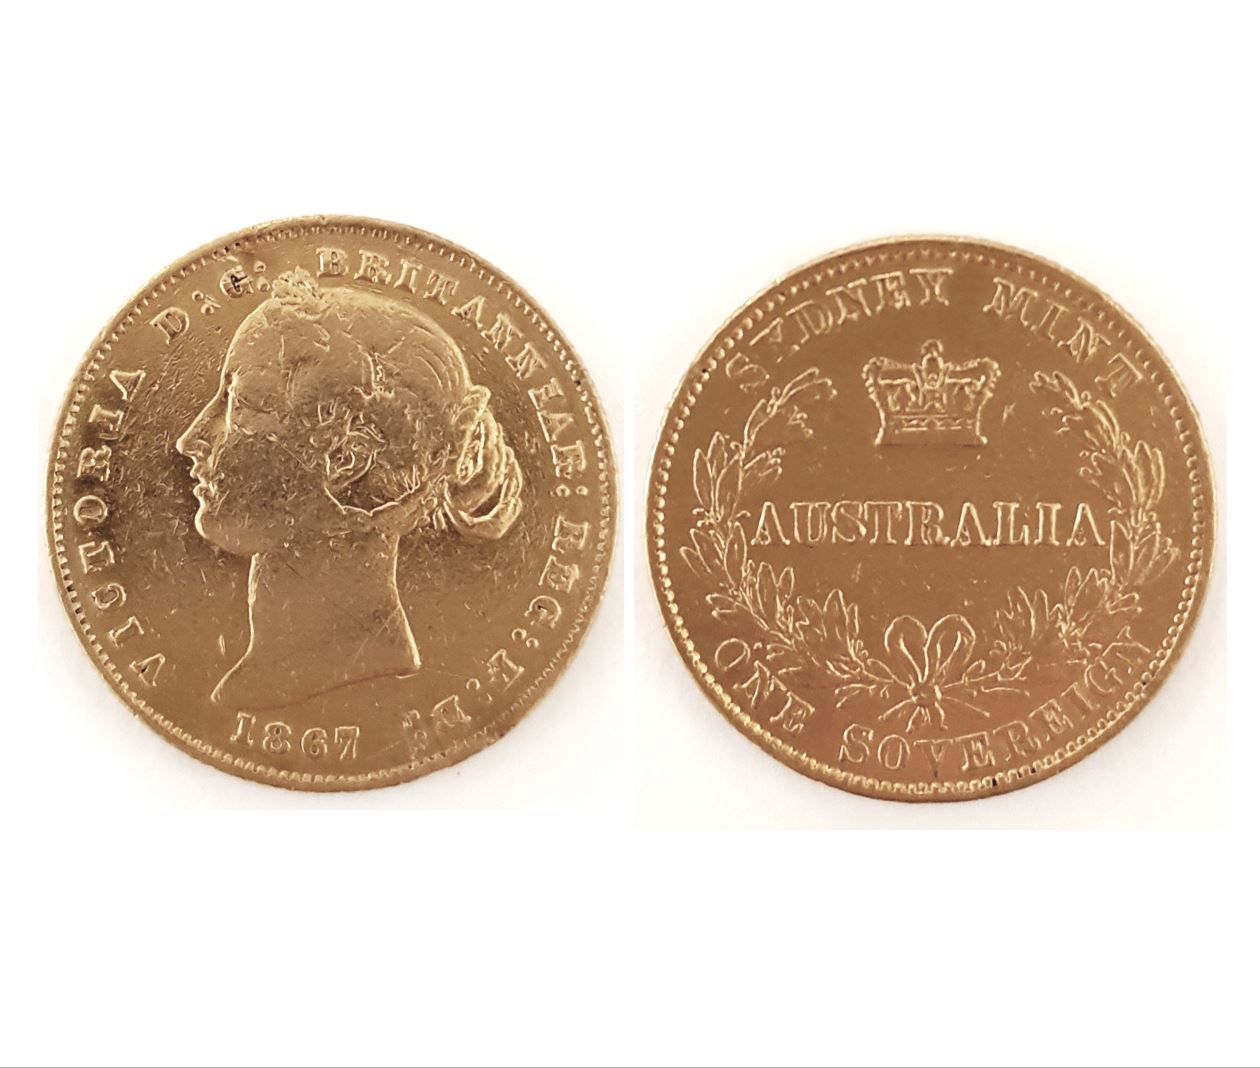 Thumbnail of 'Gold Sovereign'